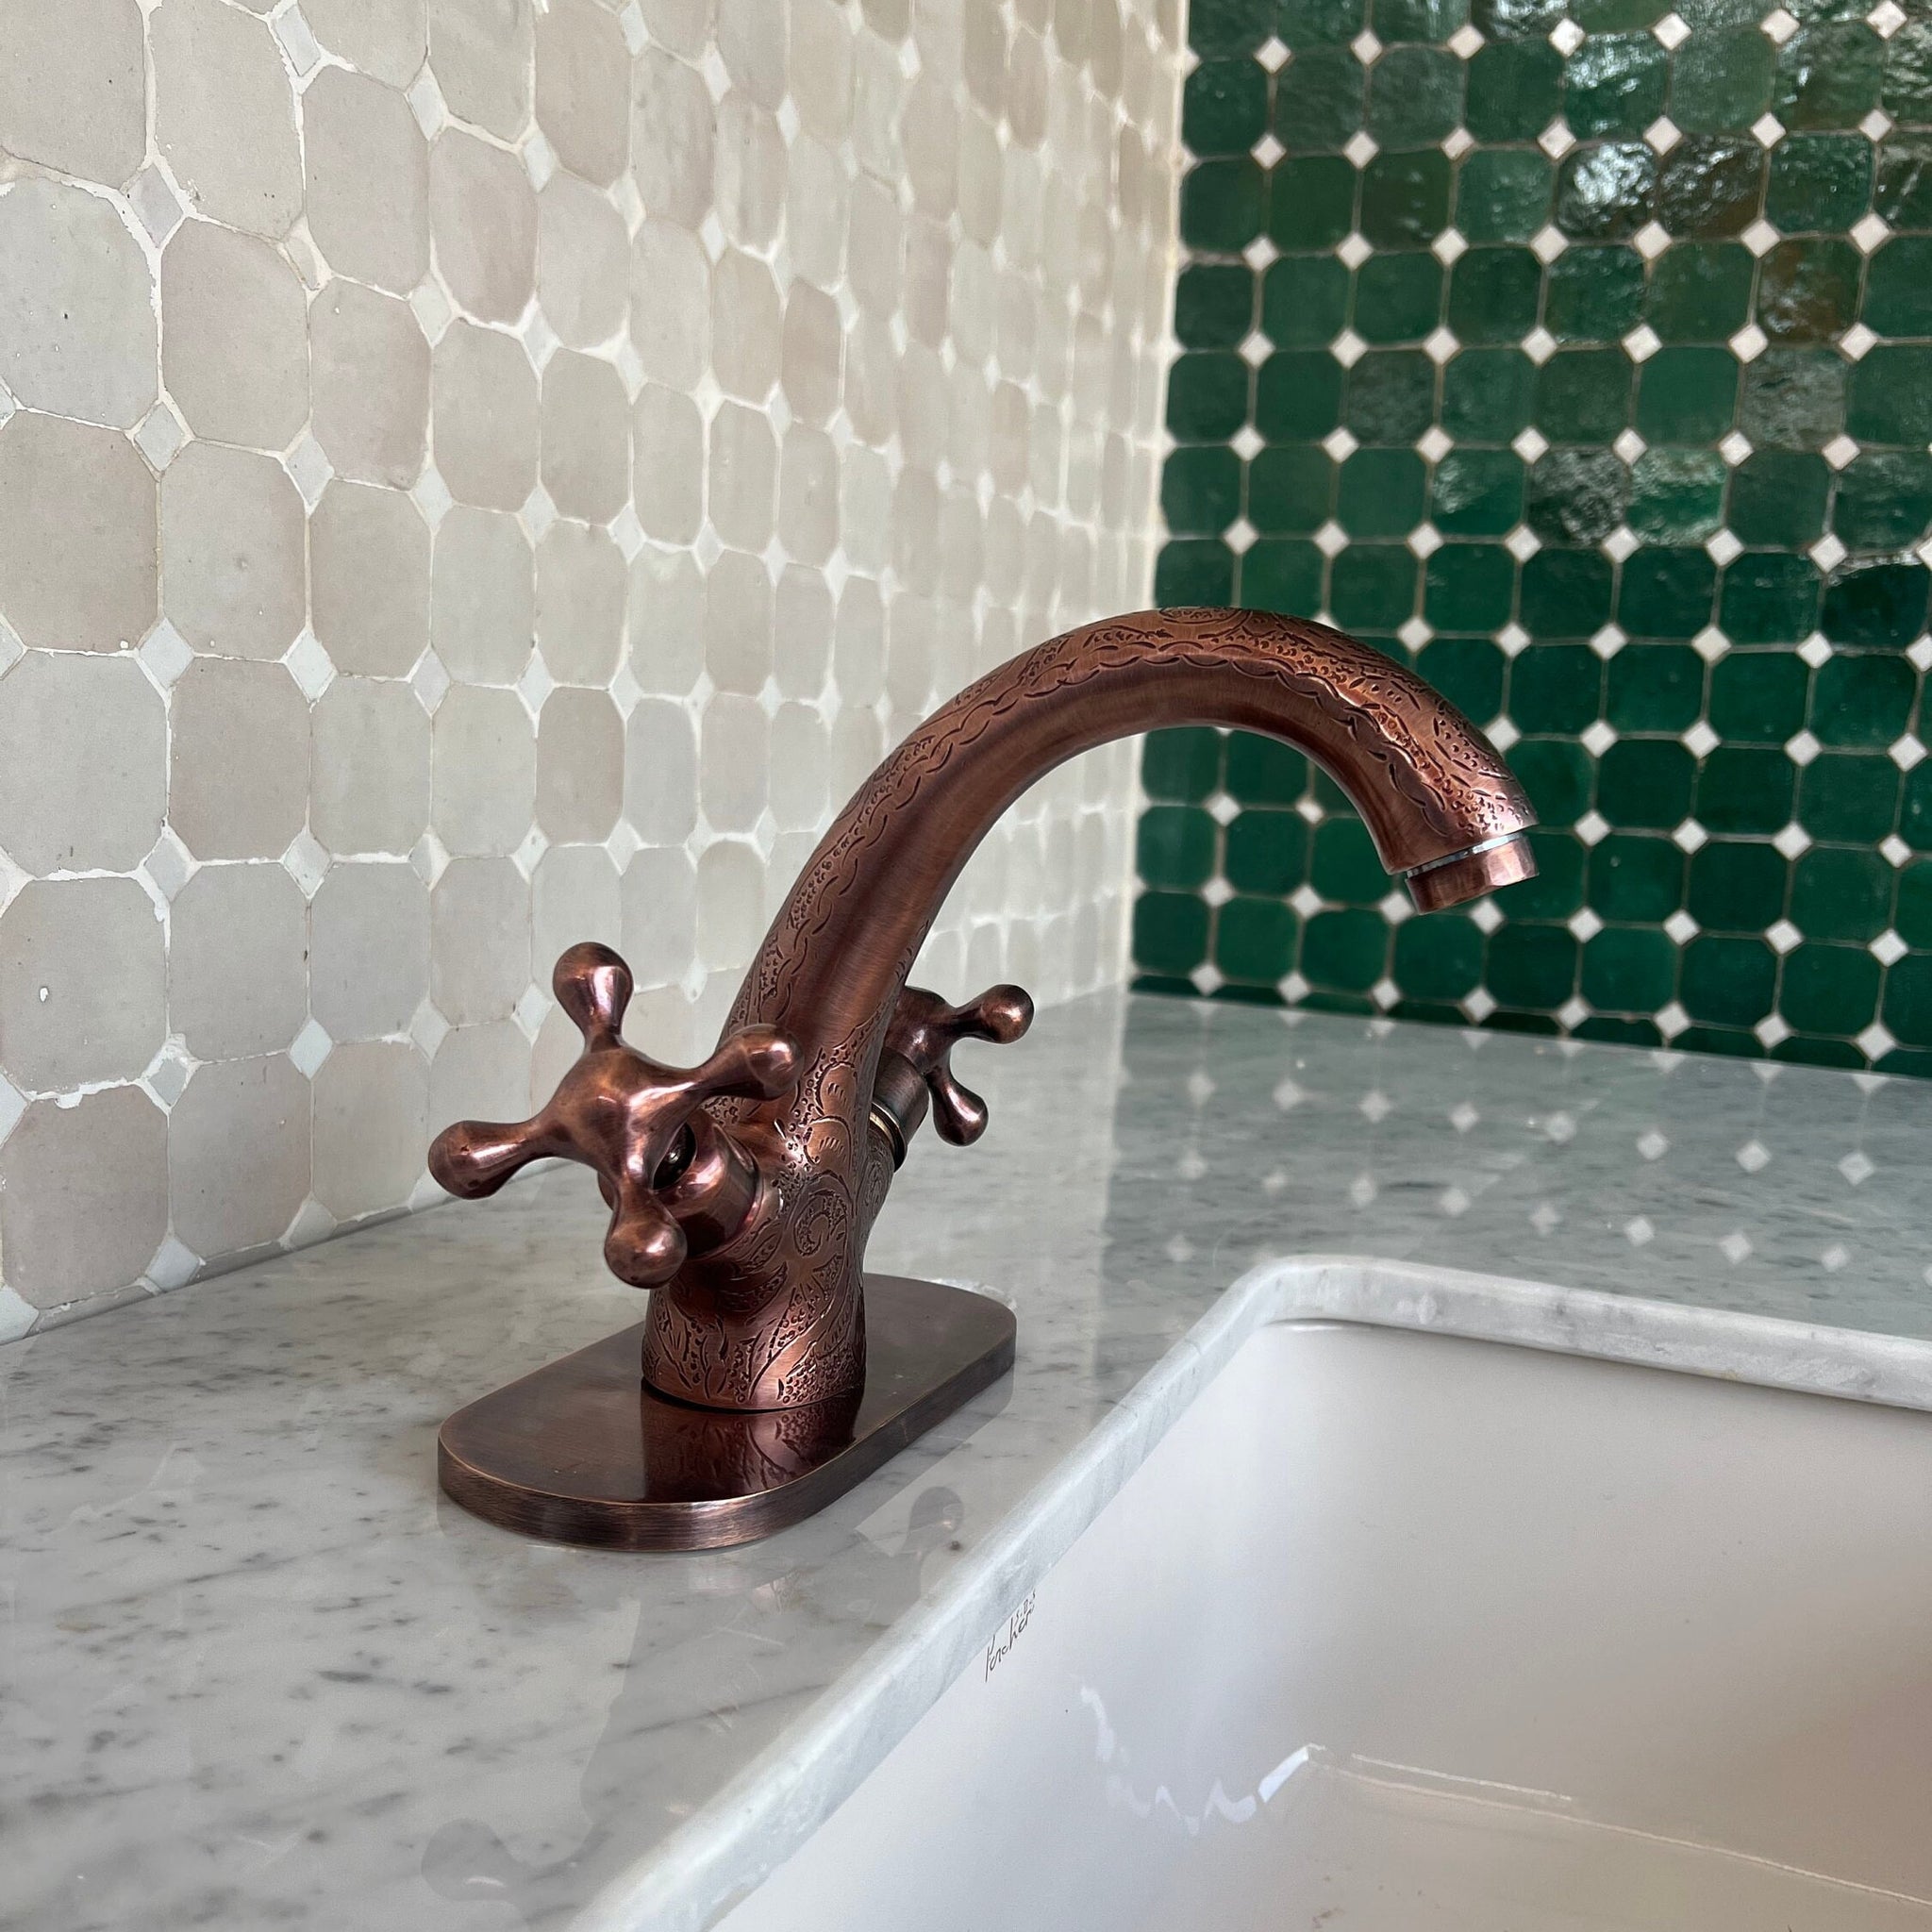 Solid Brass Single Hole Faucet With Baseplate - Copper faucet Finish and Moroccan Decoration